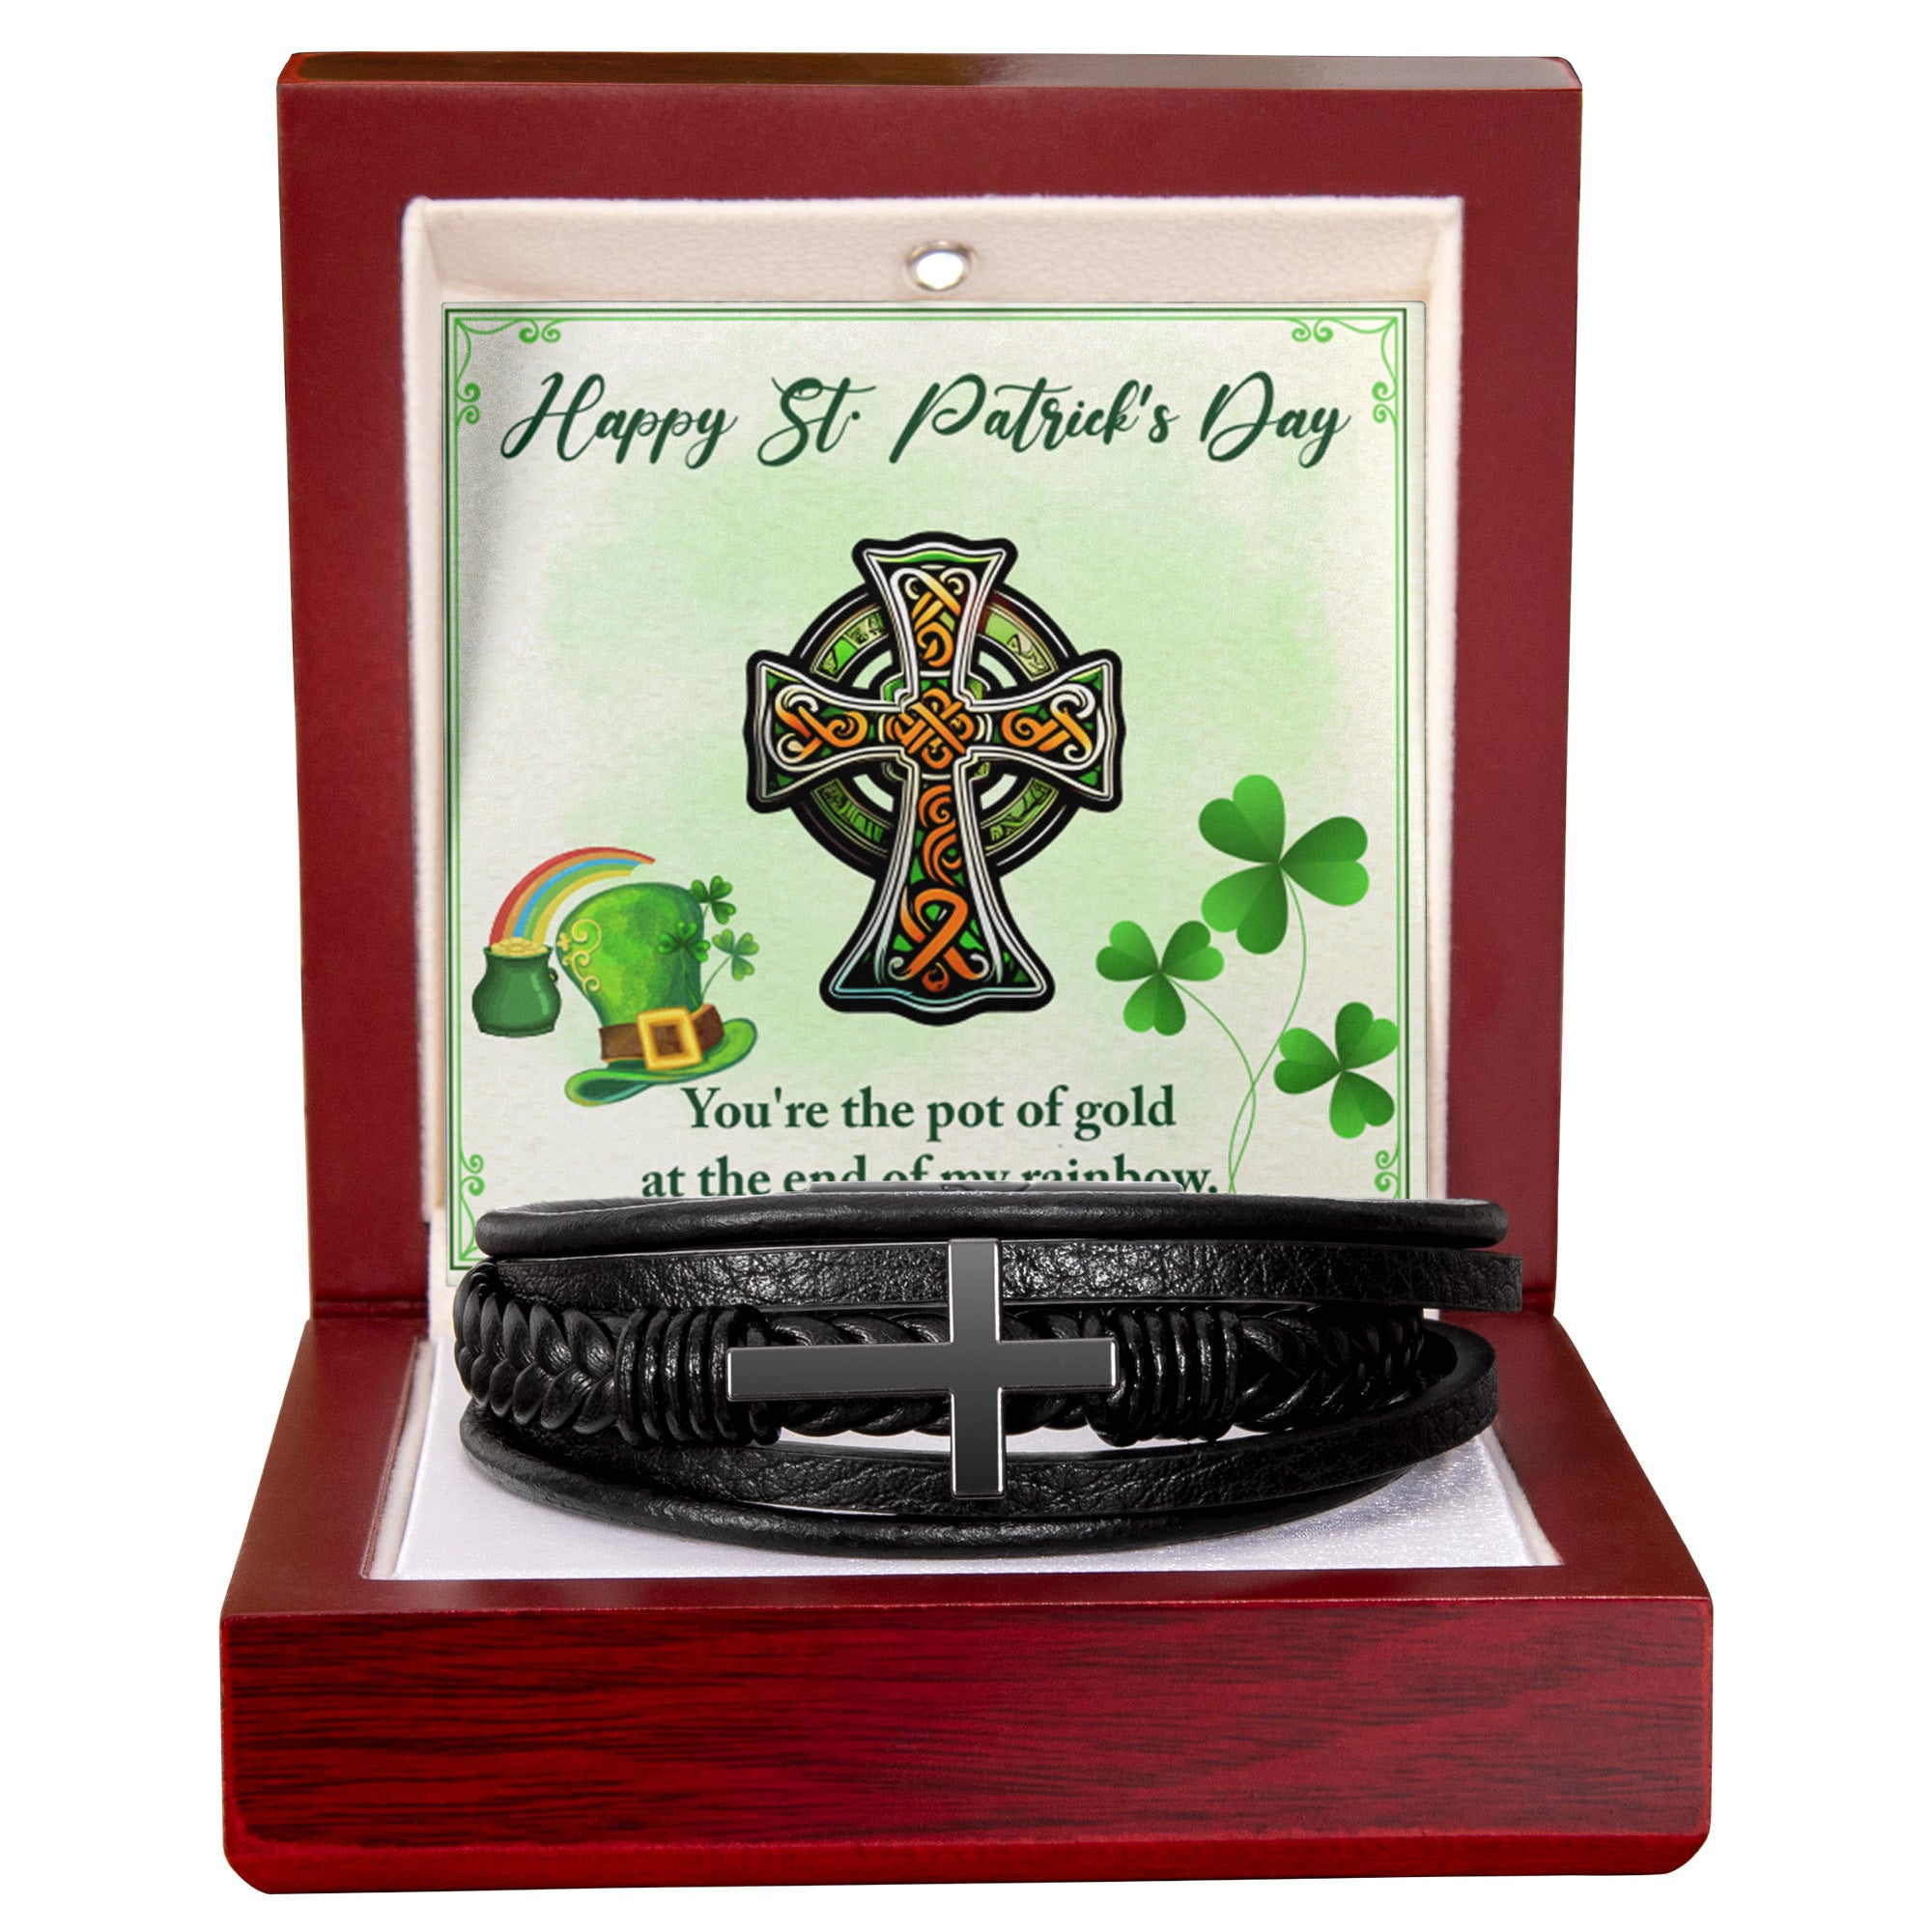 Celtic Cross You're The Pot of Gold - Saint Patrick's Day Gift - Men's Cross and Black Braided Rope Bracelet Jesus Passion Apparel